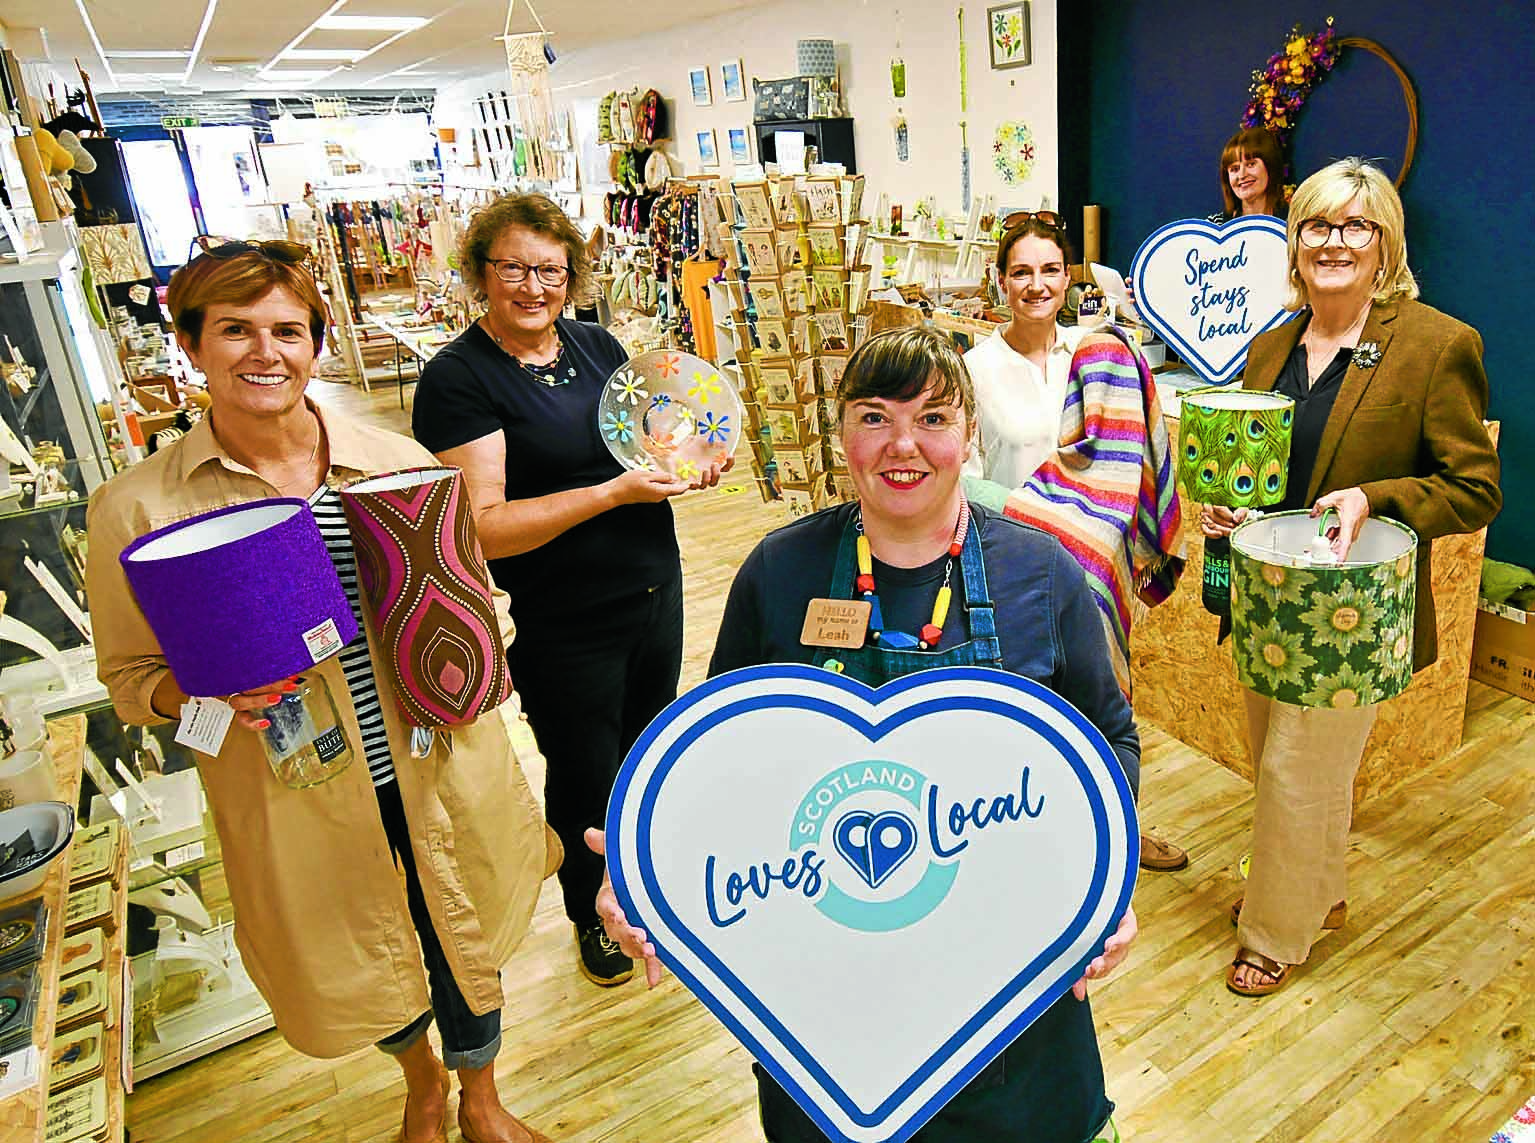 Public supports shopping locally